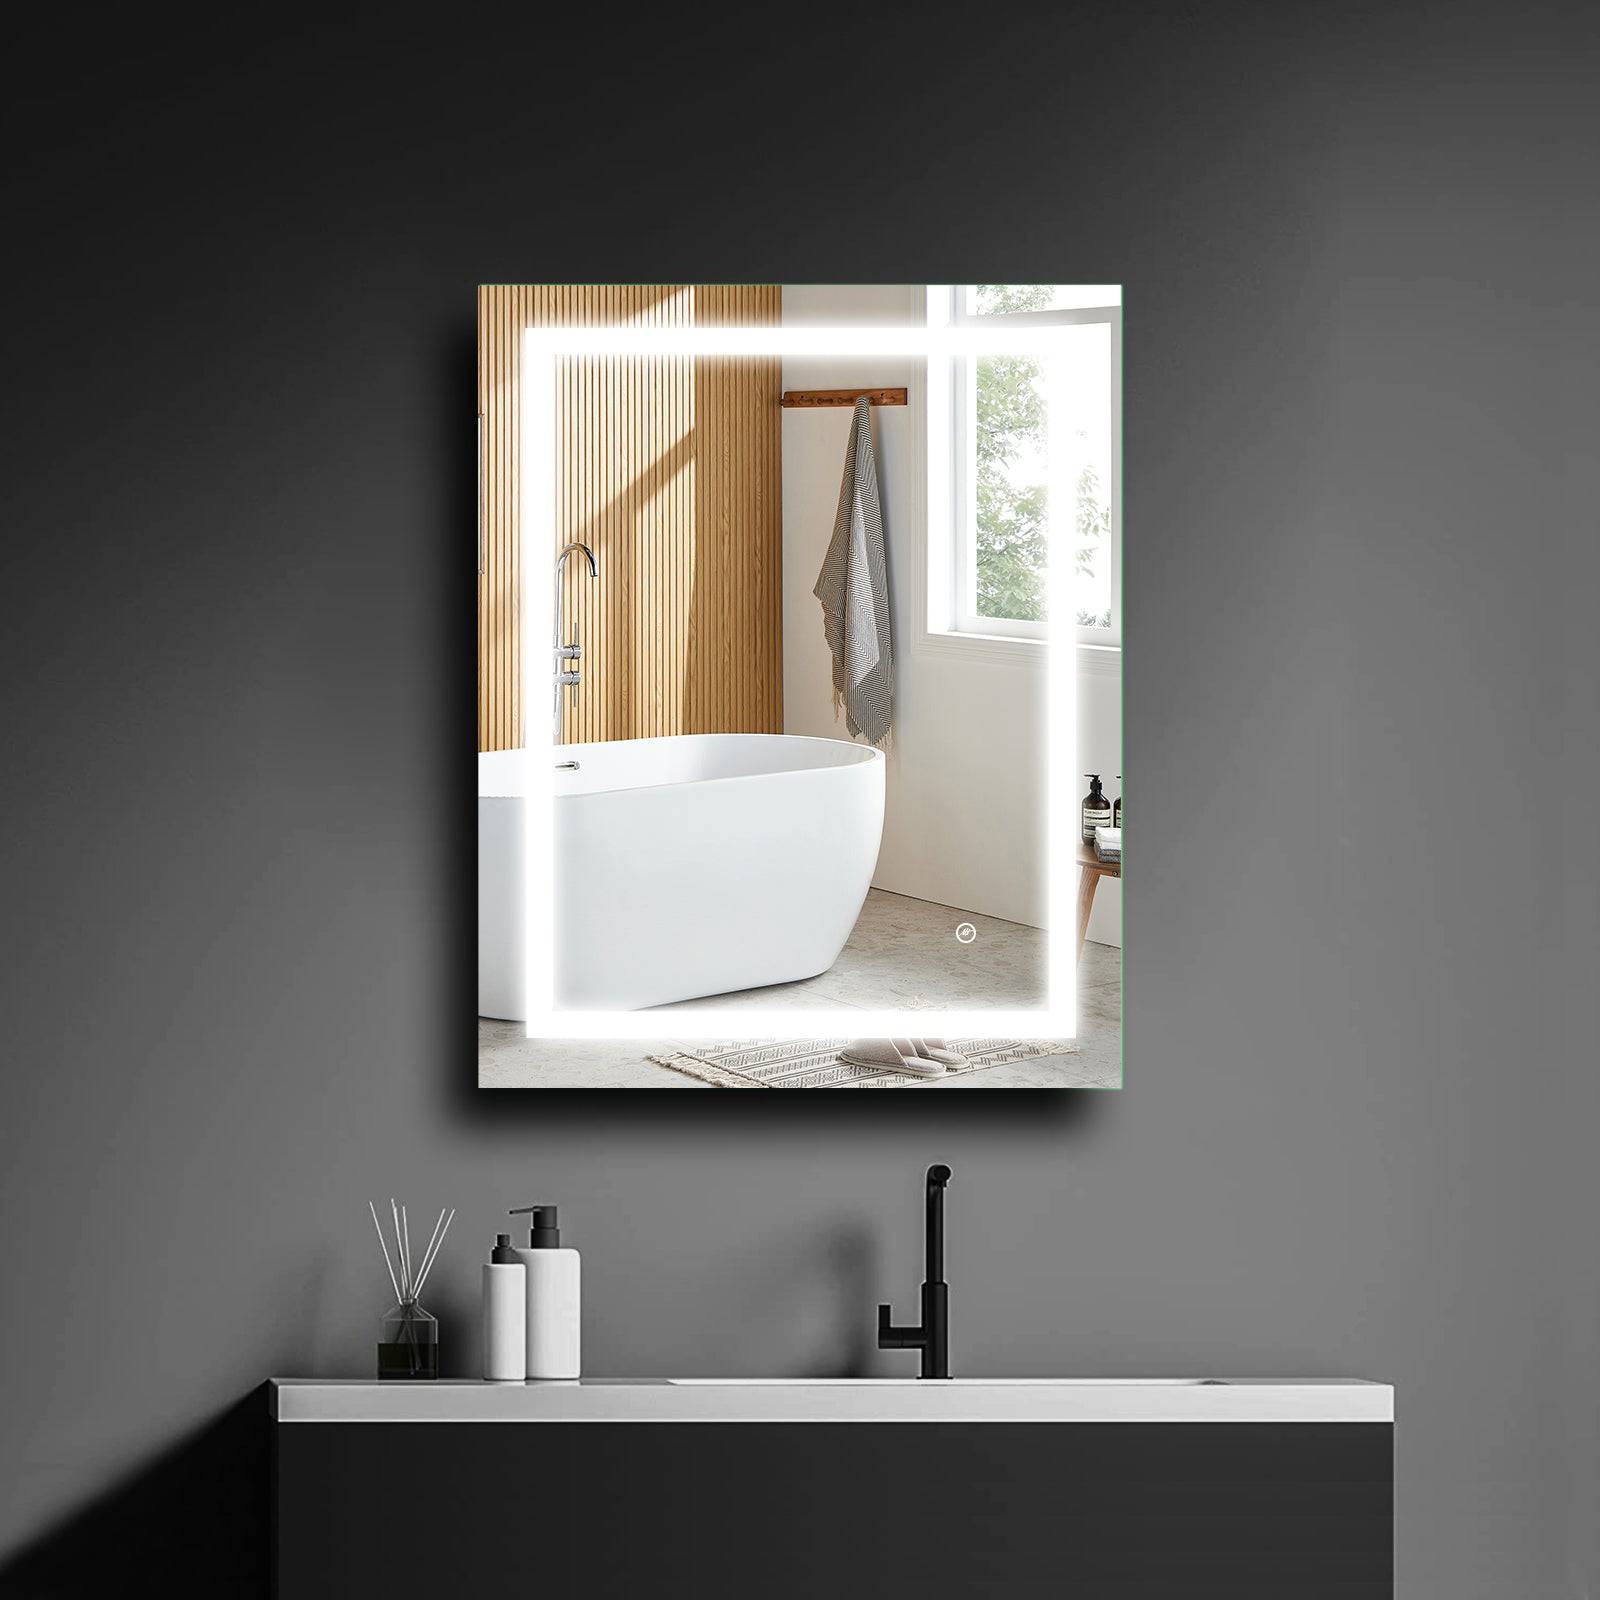 ELL Cubic Series- Single Door - Modern LED Bathroom Mirror with Defogger, Shelves, USB Charger, and Touch Switch - Surface or Recess Mounting, Aluminum Carcass, Color Temperature Changing, ETL Listed - Sleek and Functional Grooming Solution - Eco LED Lightings 